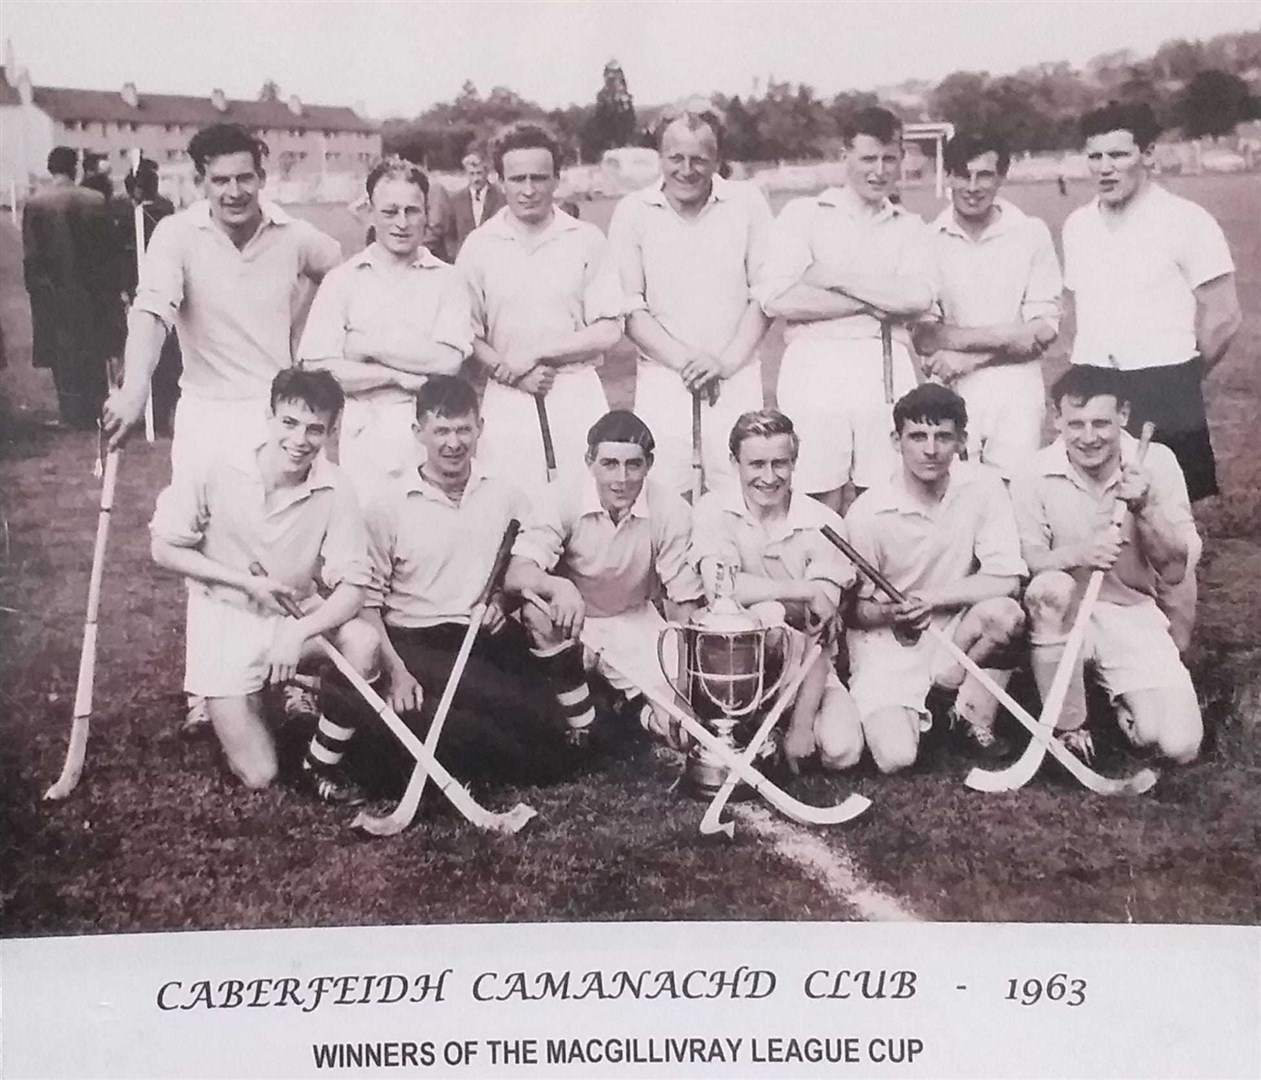 John MacGregor (back row, third from right) with the 1963 MacGillivray League Cup winners.